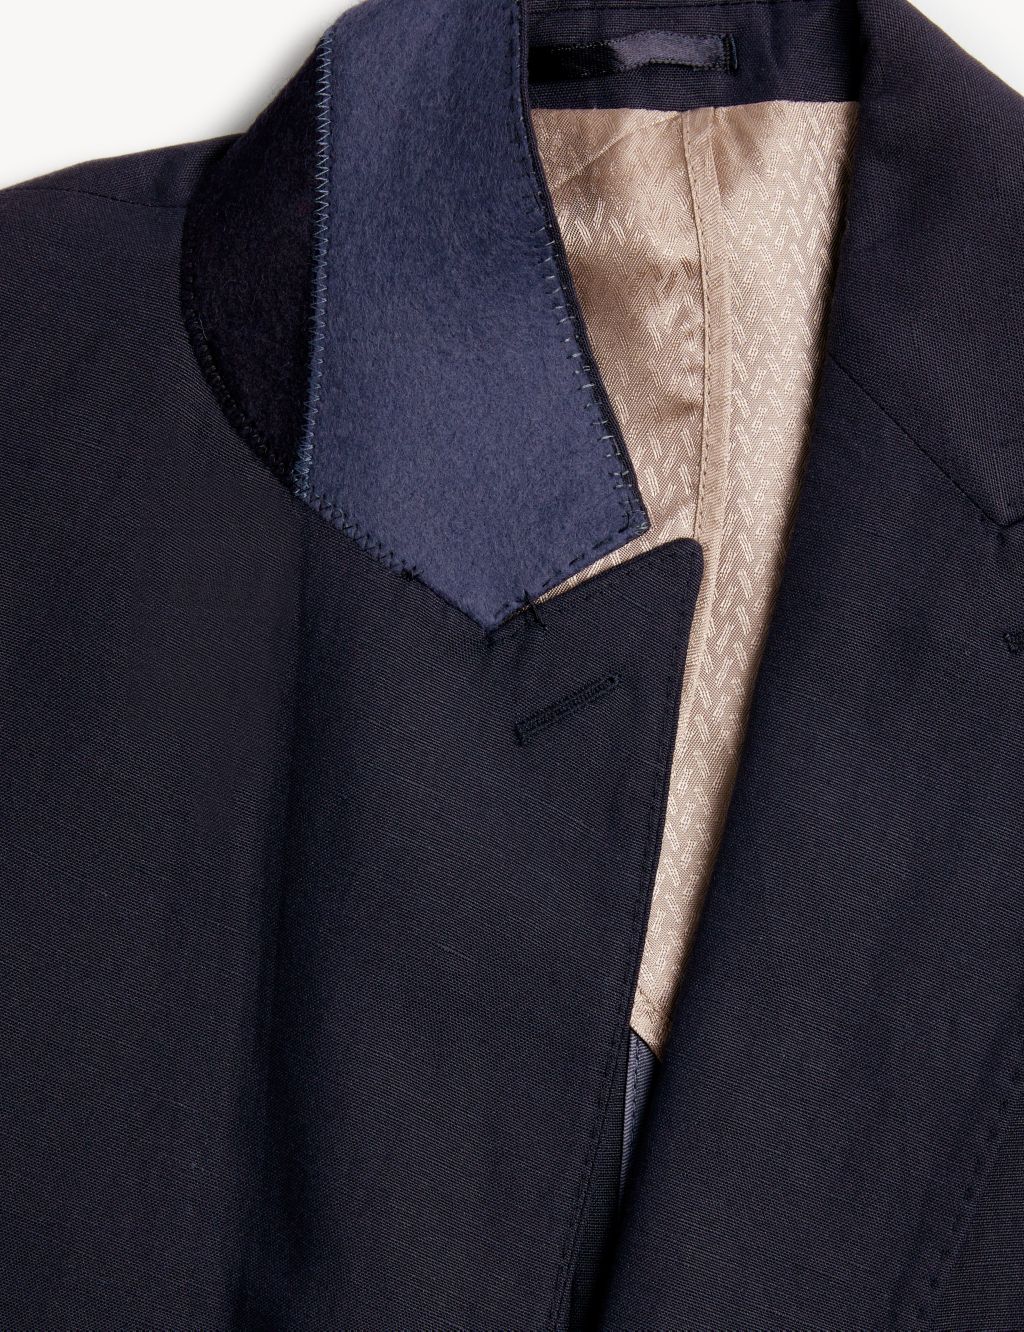 Tailored Fit Silk and Linen Jacket image 3